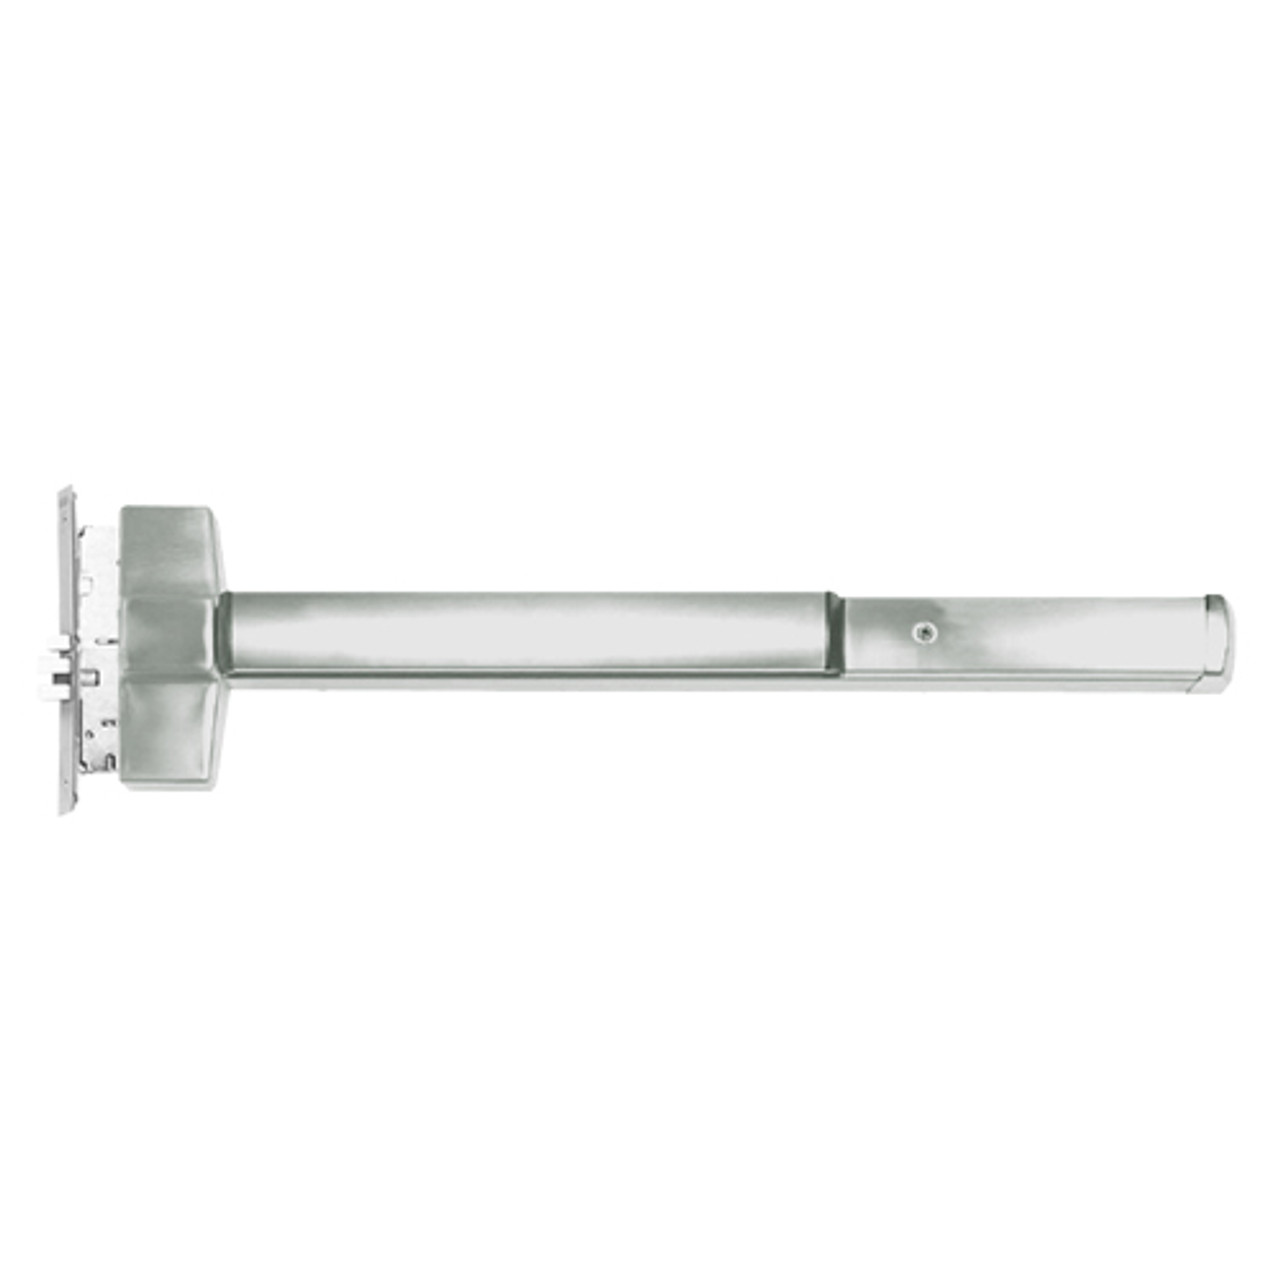 ED5600L-619-W048-LHR-SAF Corbin ED5600 Series Non Fire Rated Mortise Exit Device in Satin Nickel Finish